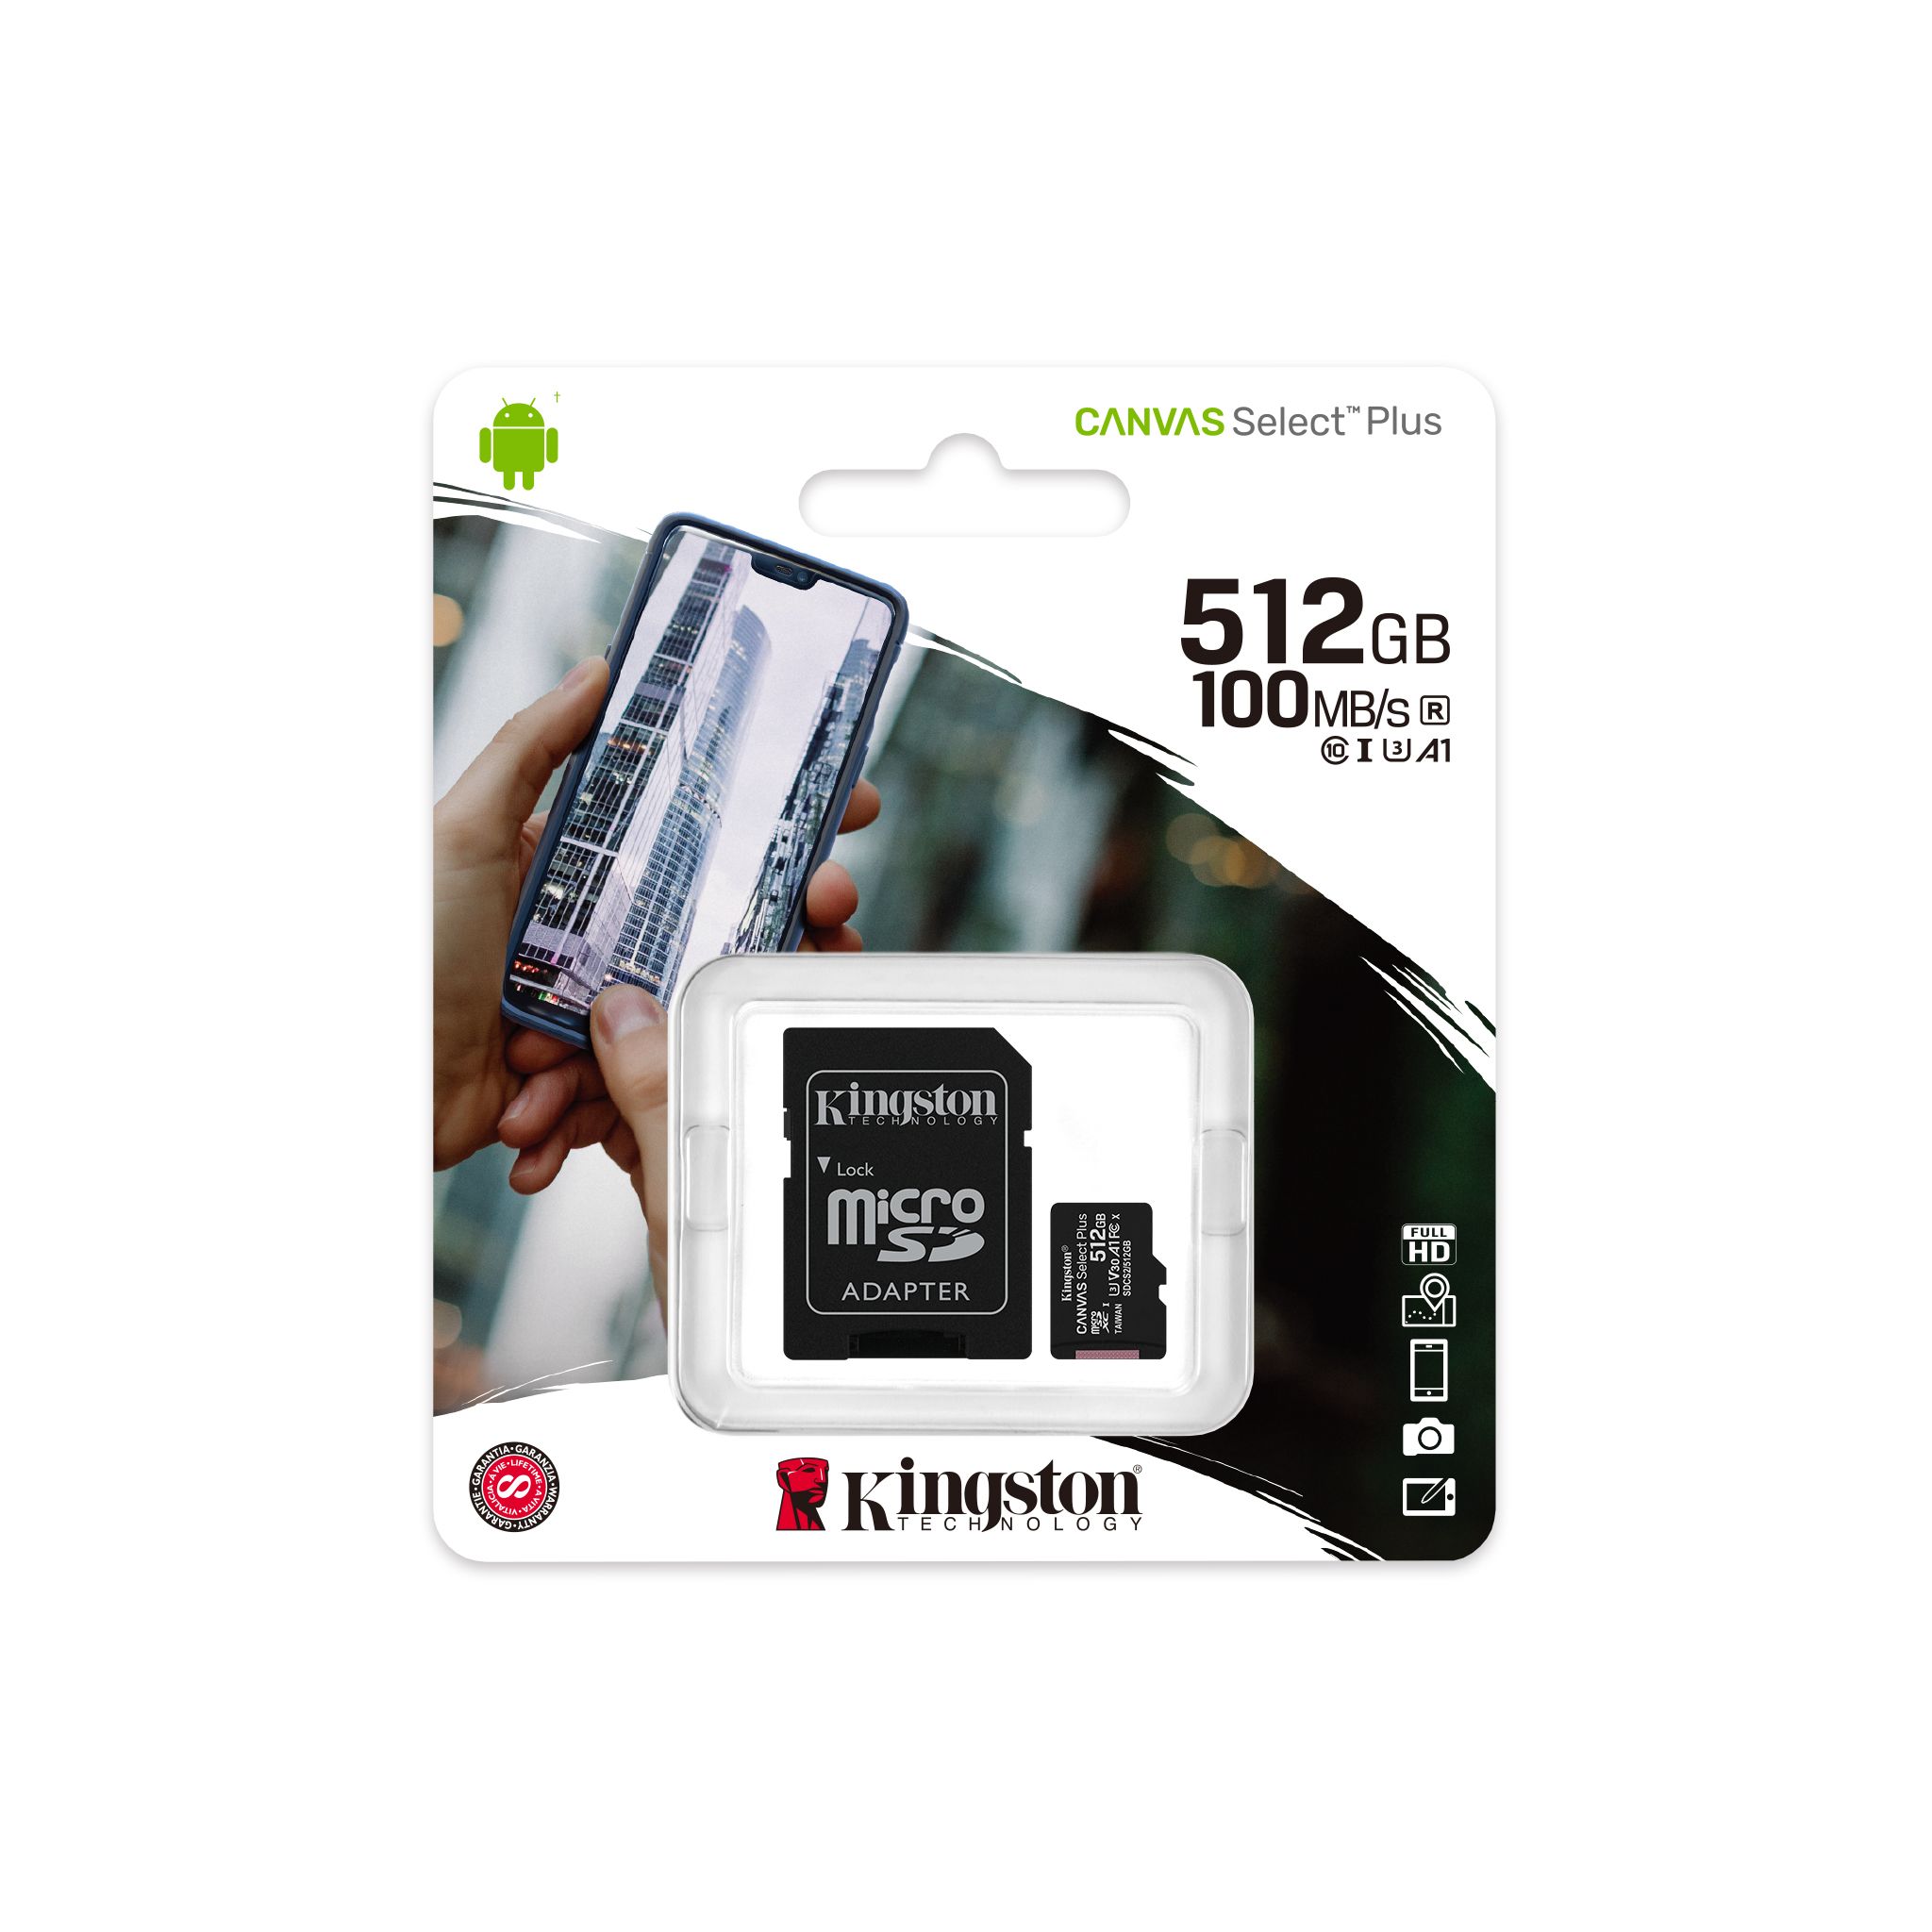 Kingston 512GB Videocon Thunder 100MBs Works with Kingston II V50DC MicroSDXC Canvas Select Plus Card Verified by SanFlash. 